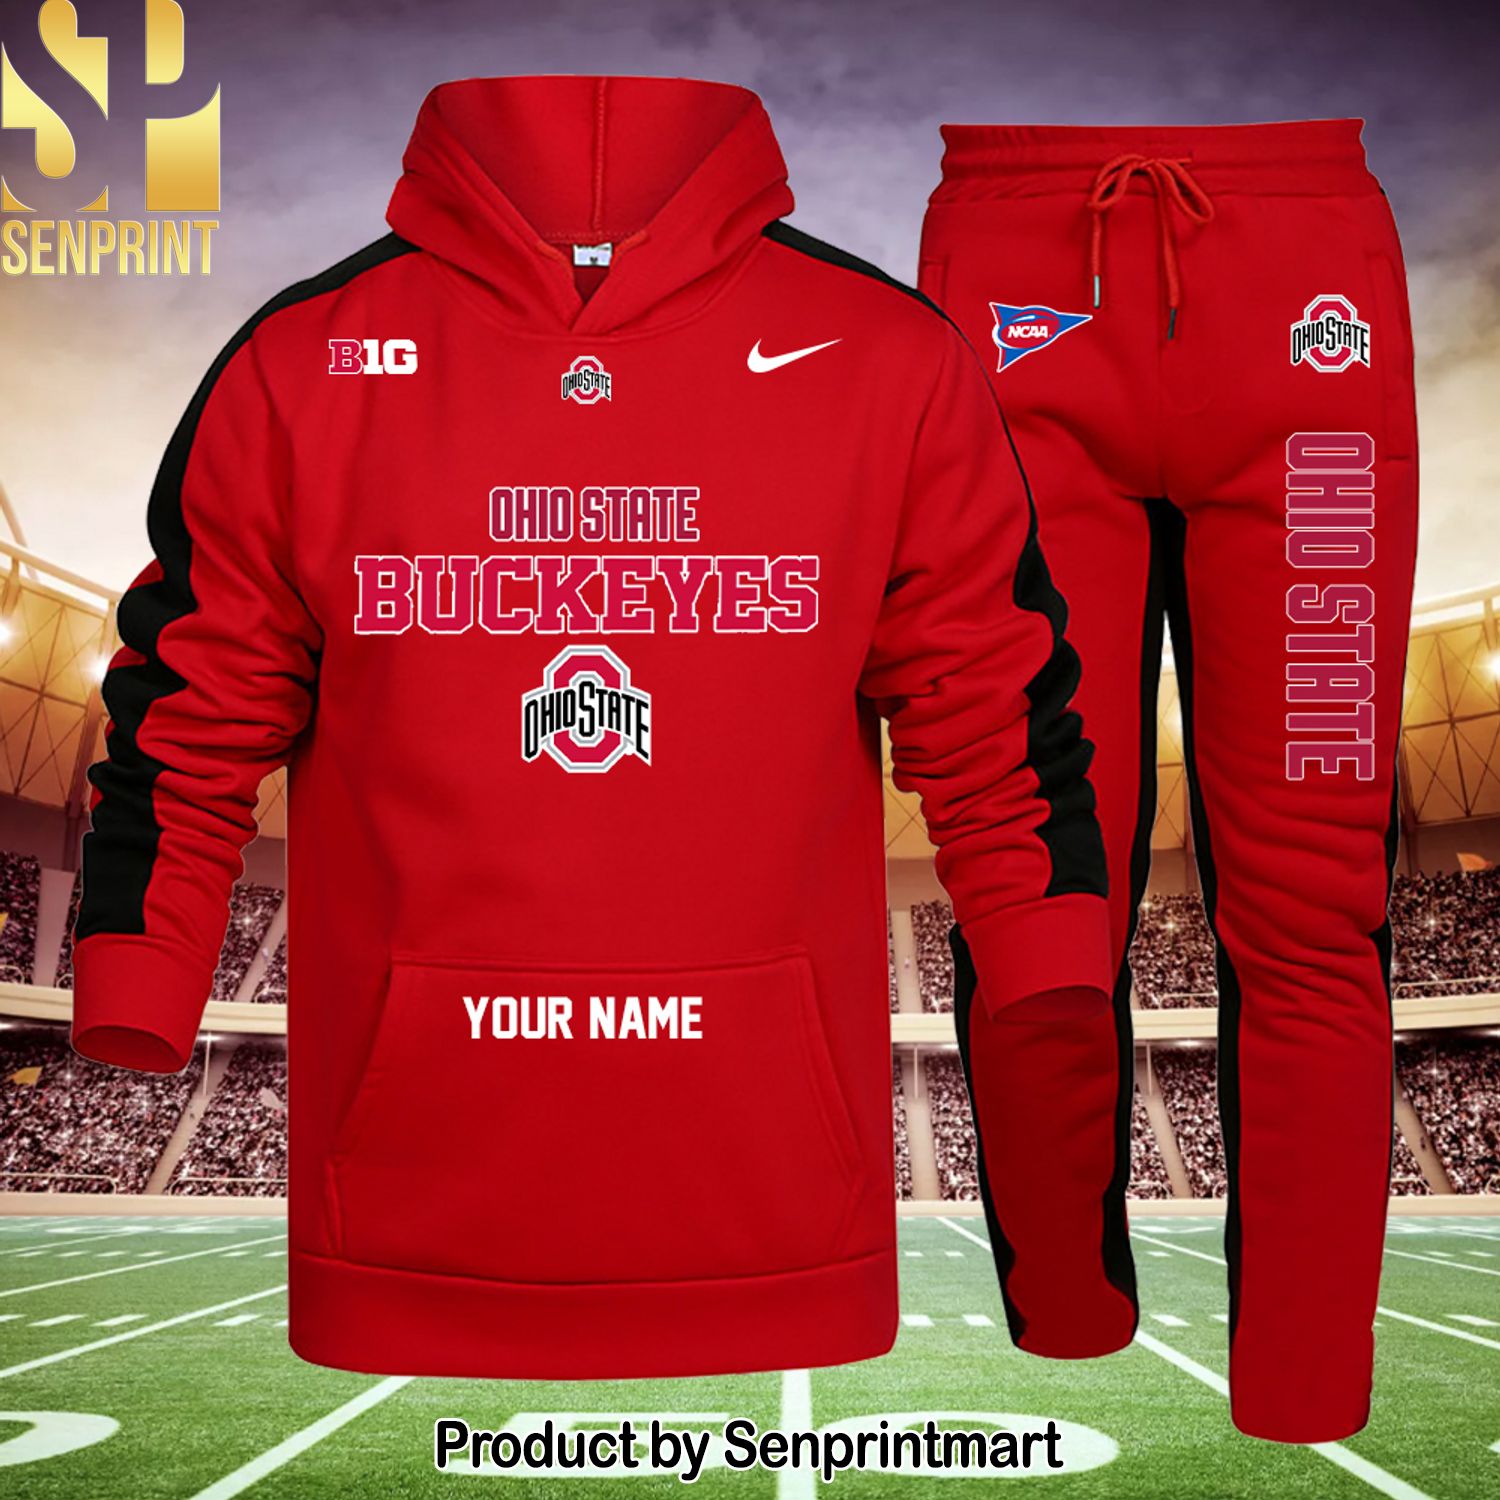 Ohio State Buckeyes All Over Printed Unisex Shirt and Pants